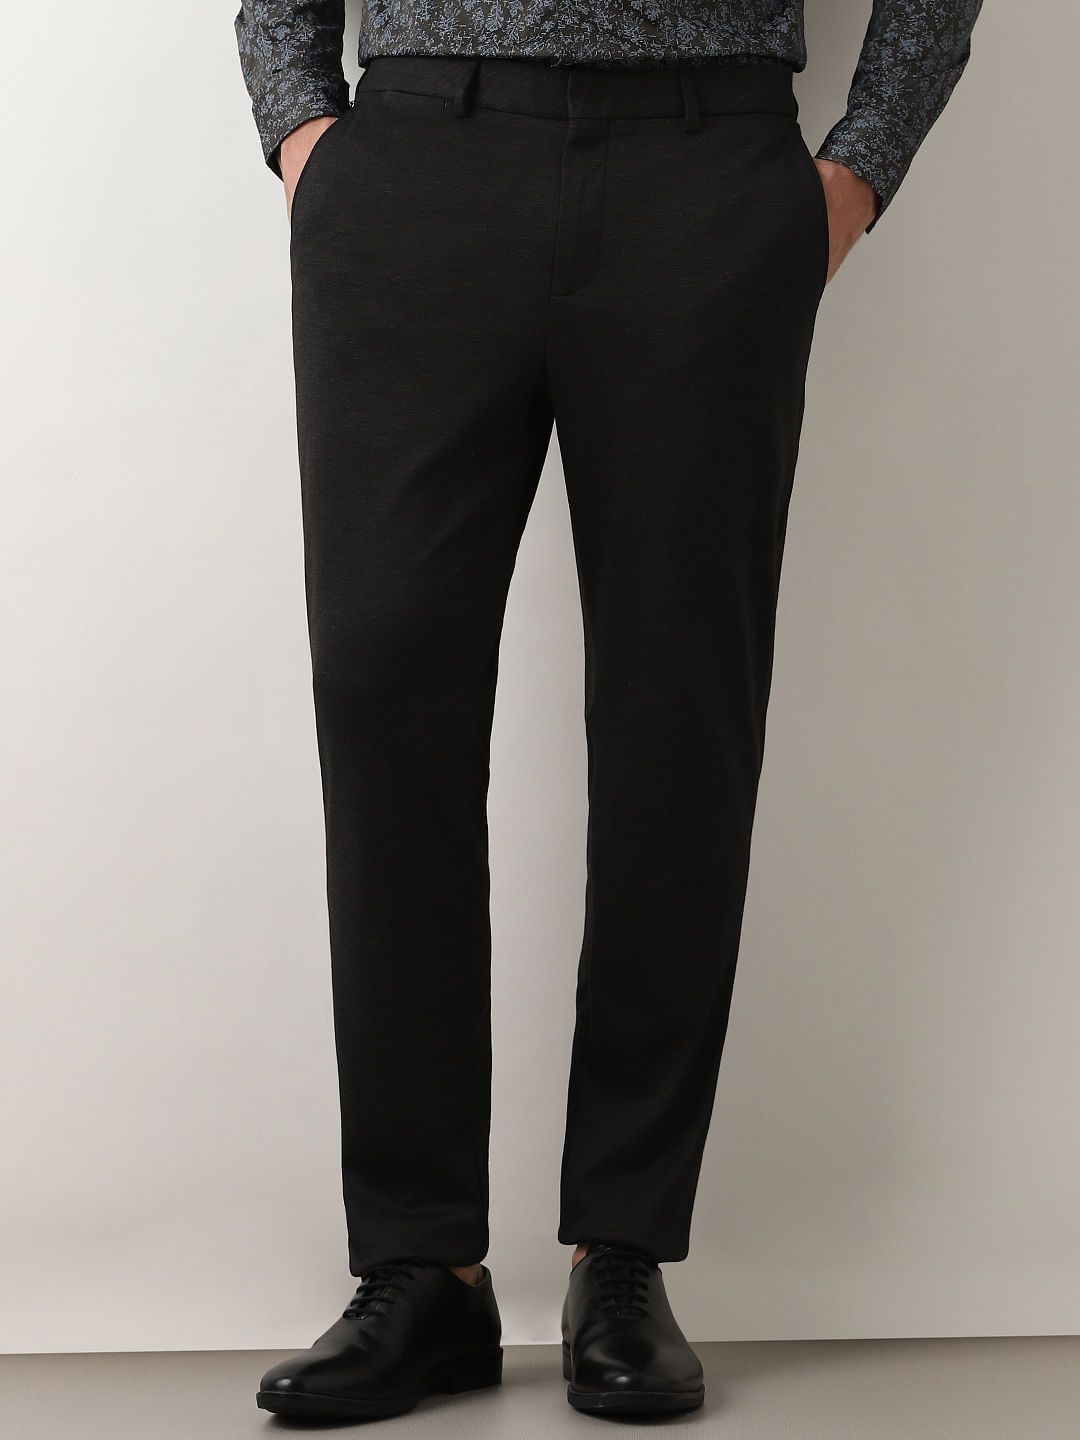 Standards & Practices Women's Dress Pants | Fun and Flirty Contemporary  Bottoms